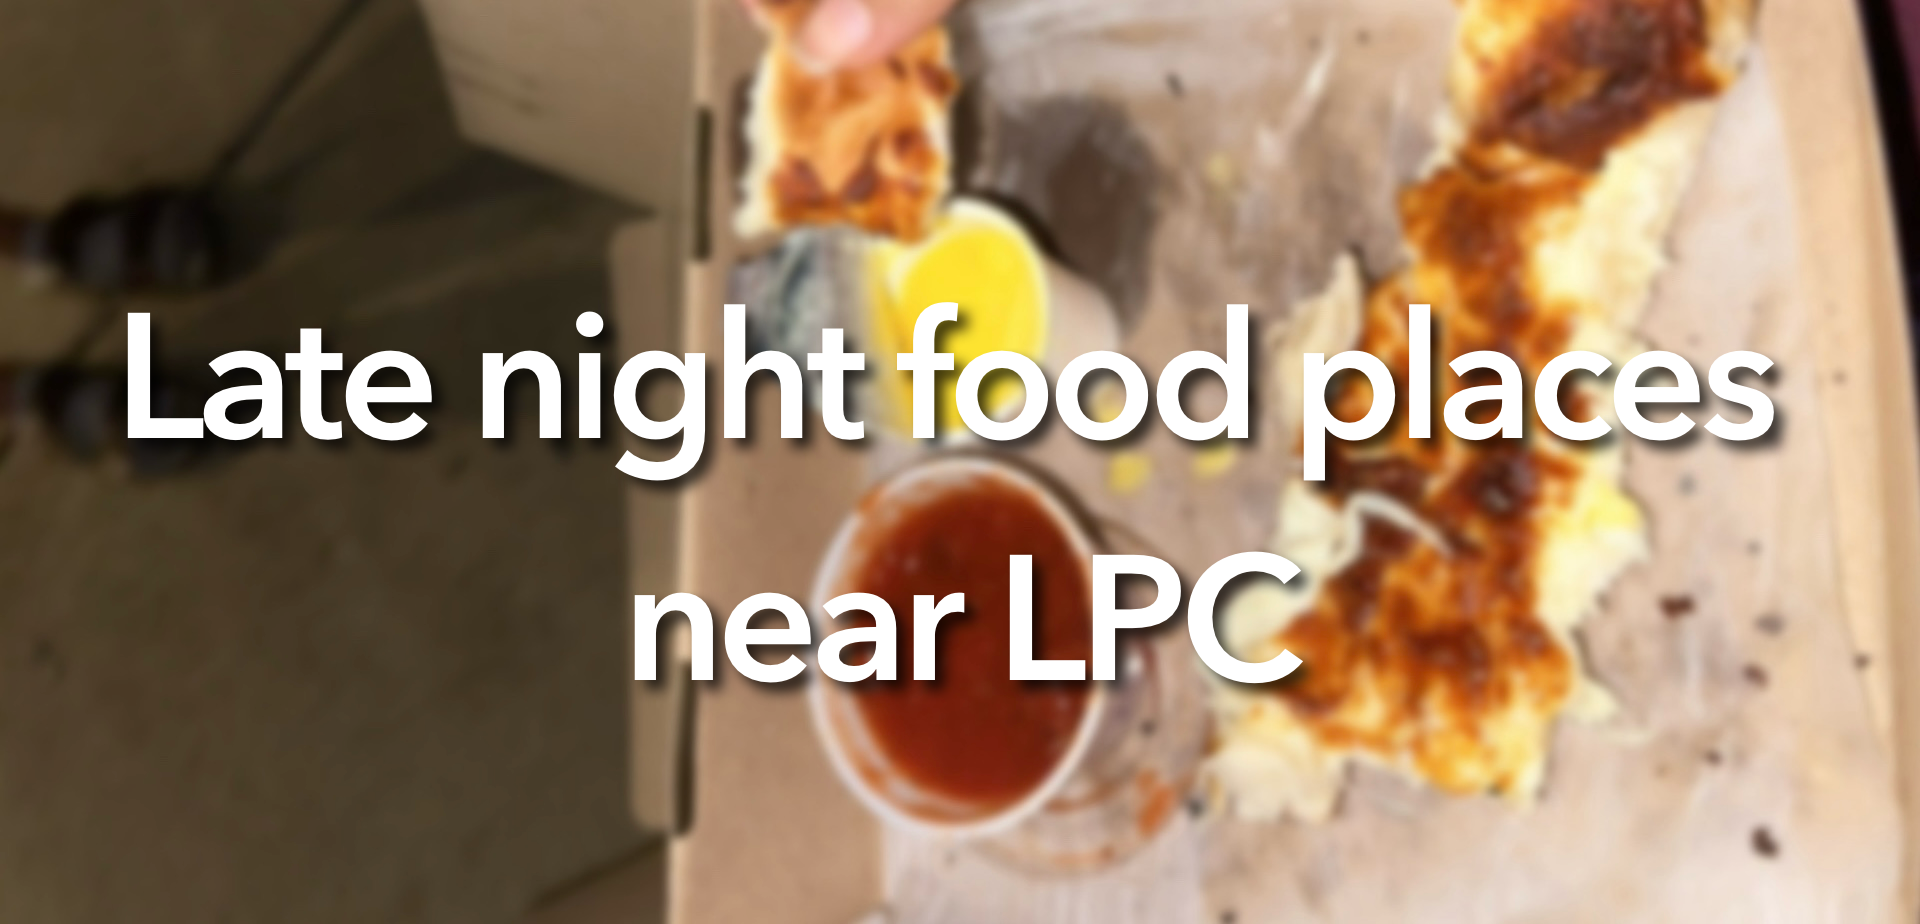 An image with the caption “Late night food places near LPC” on it.